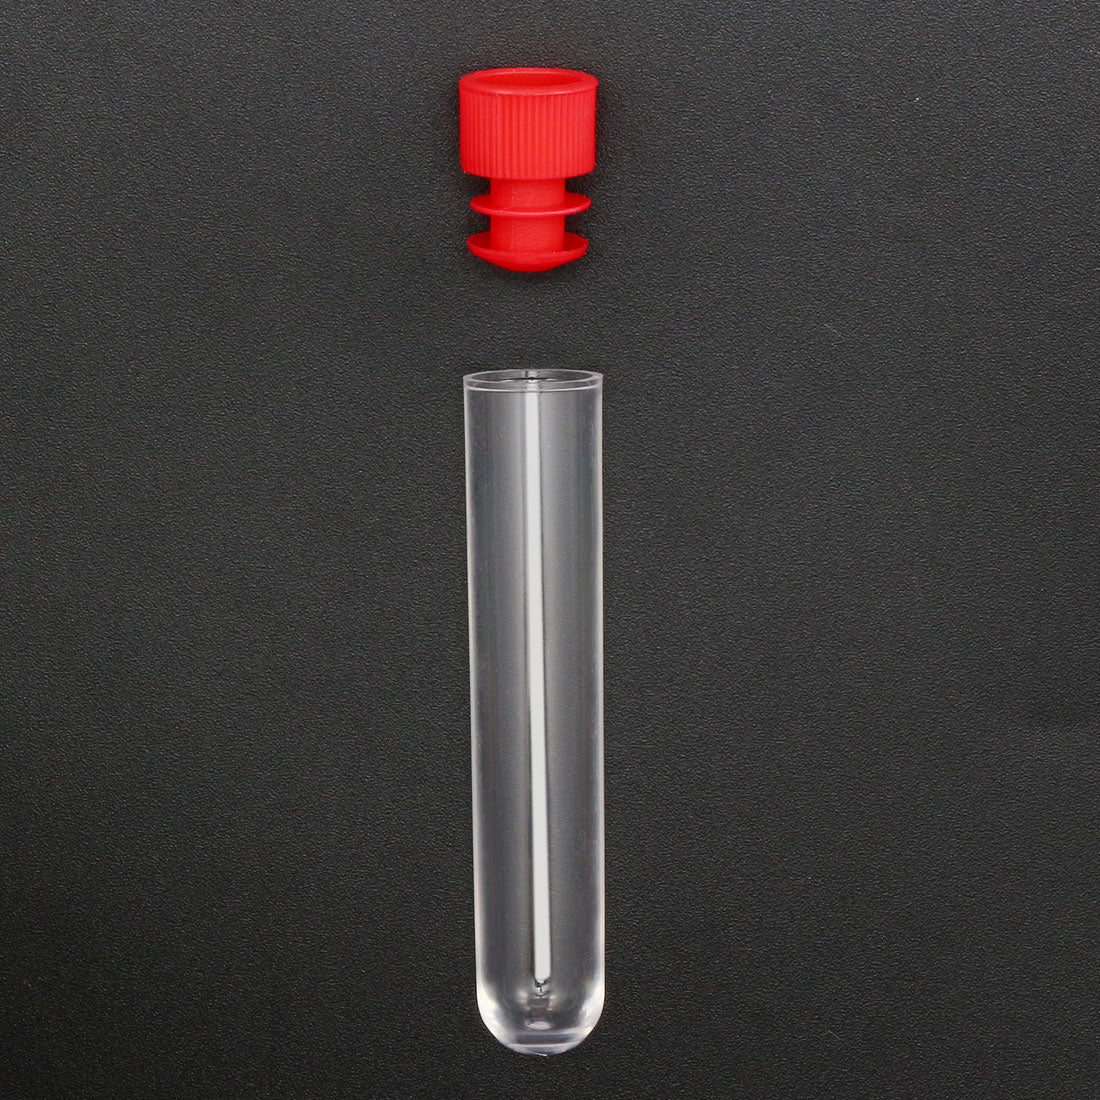 uxcell Uxcell 100 Pcs Centrifuge Test Tube Round Bottom Polystyrene with Red Cap